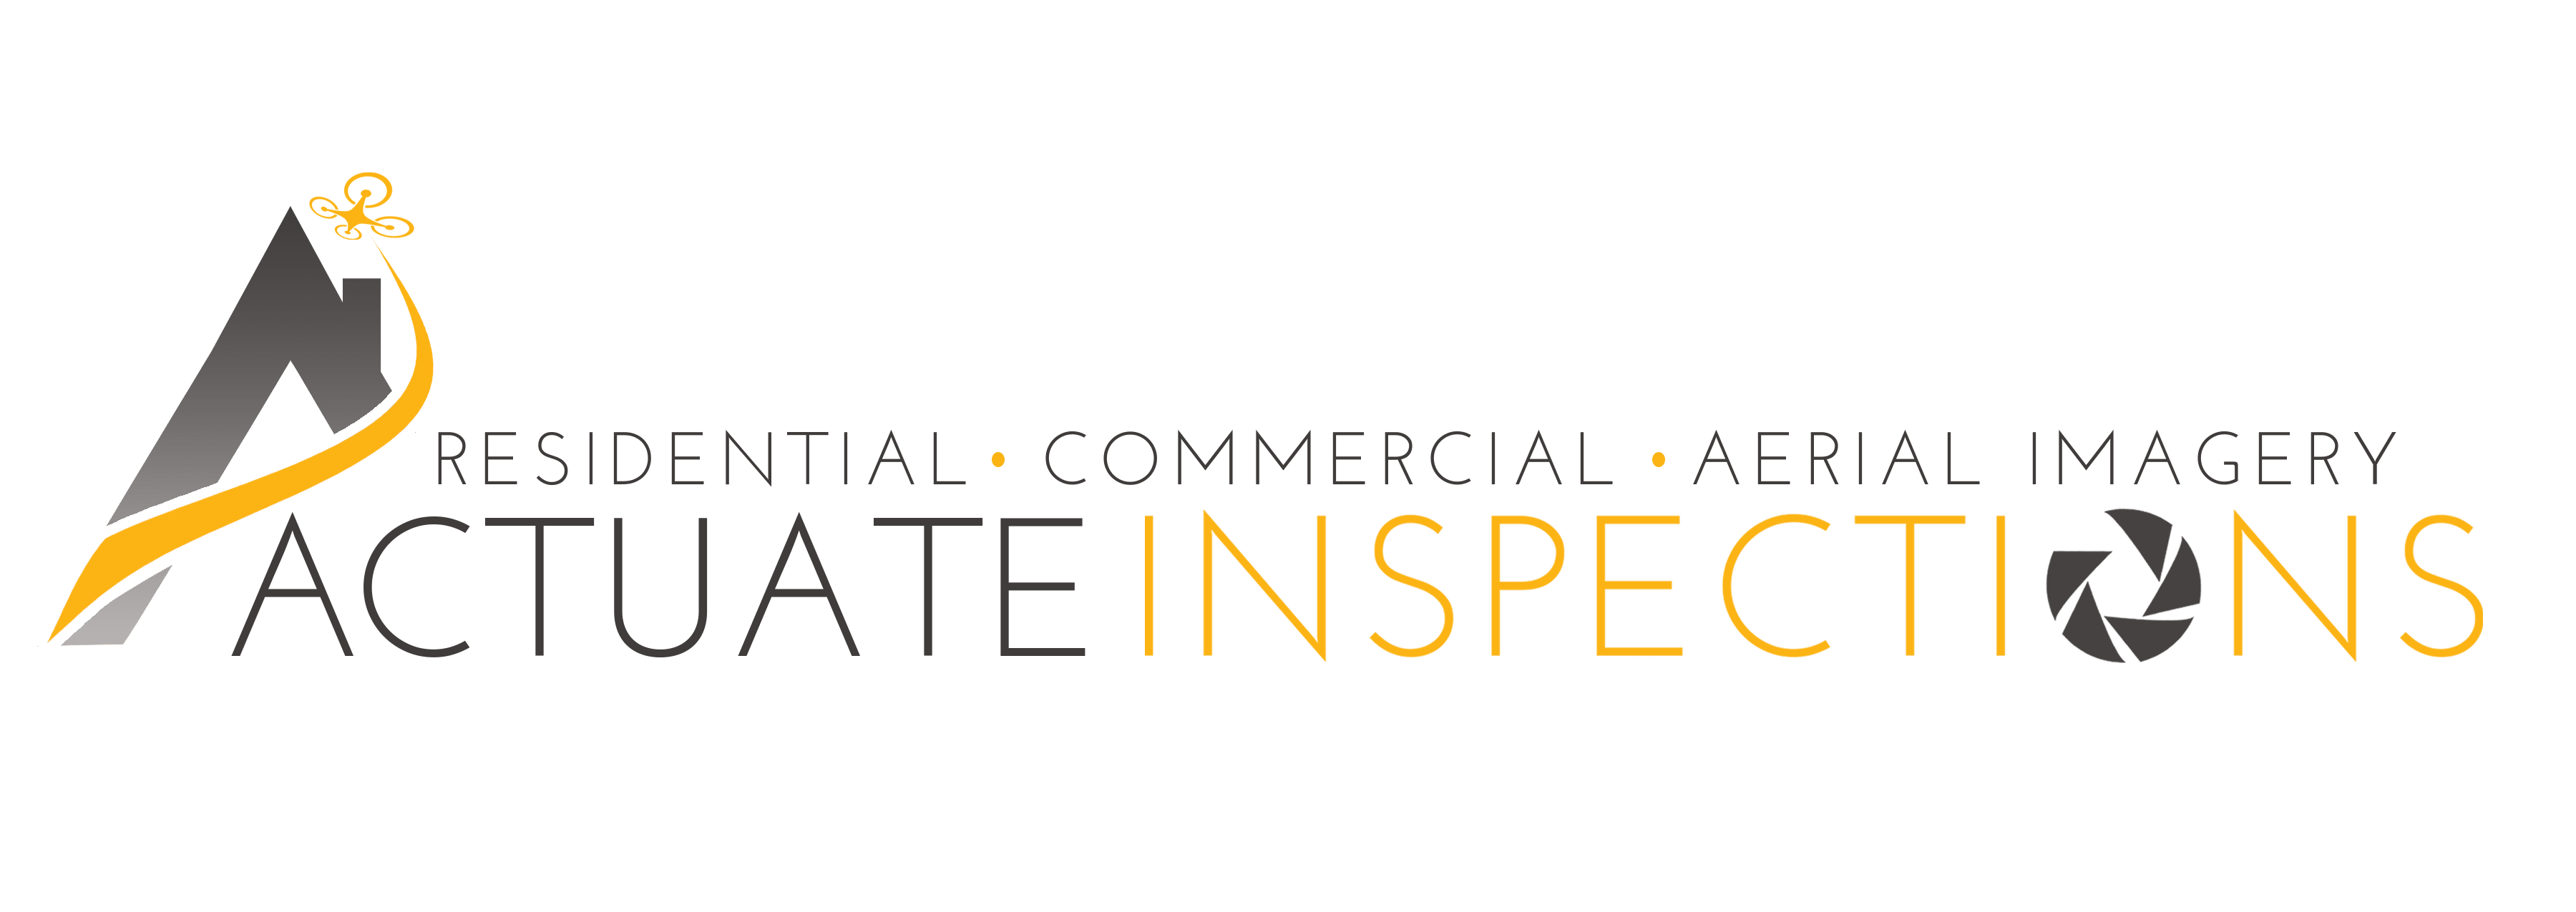 Actuate Inspections, LLC Logo